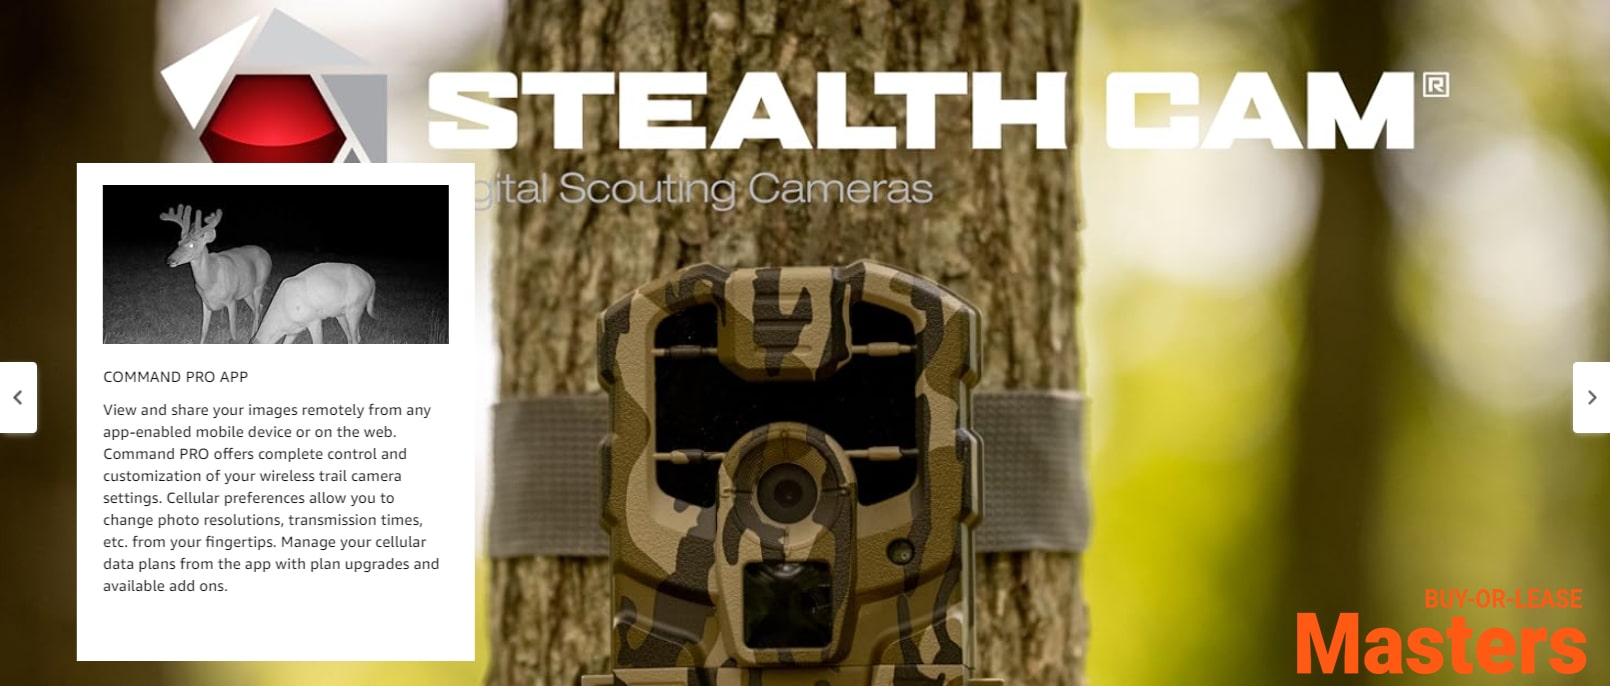 stealth-x-pro-cellular-trail-cameras-content (7)